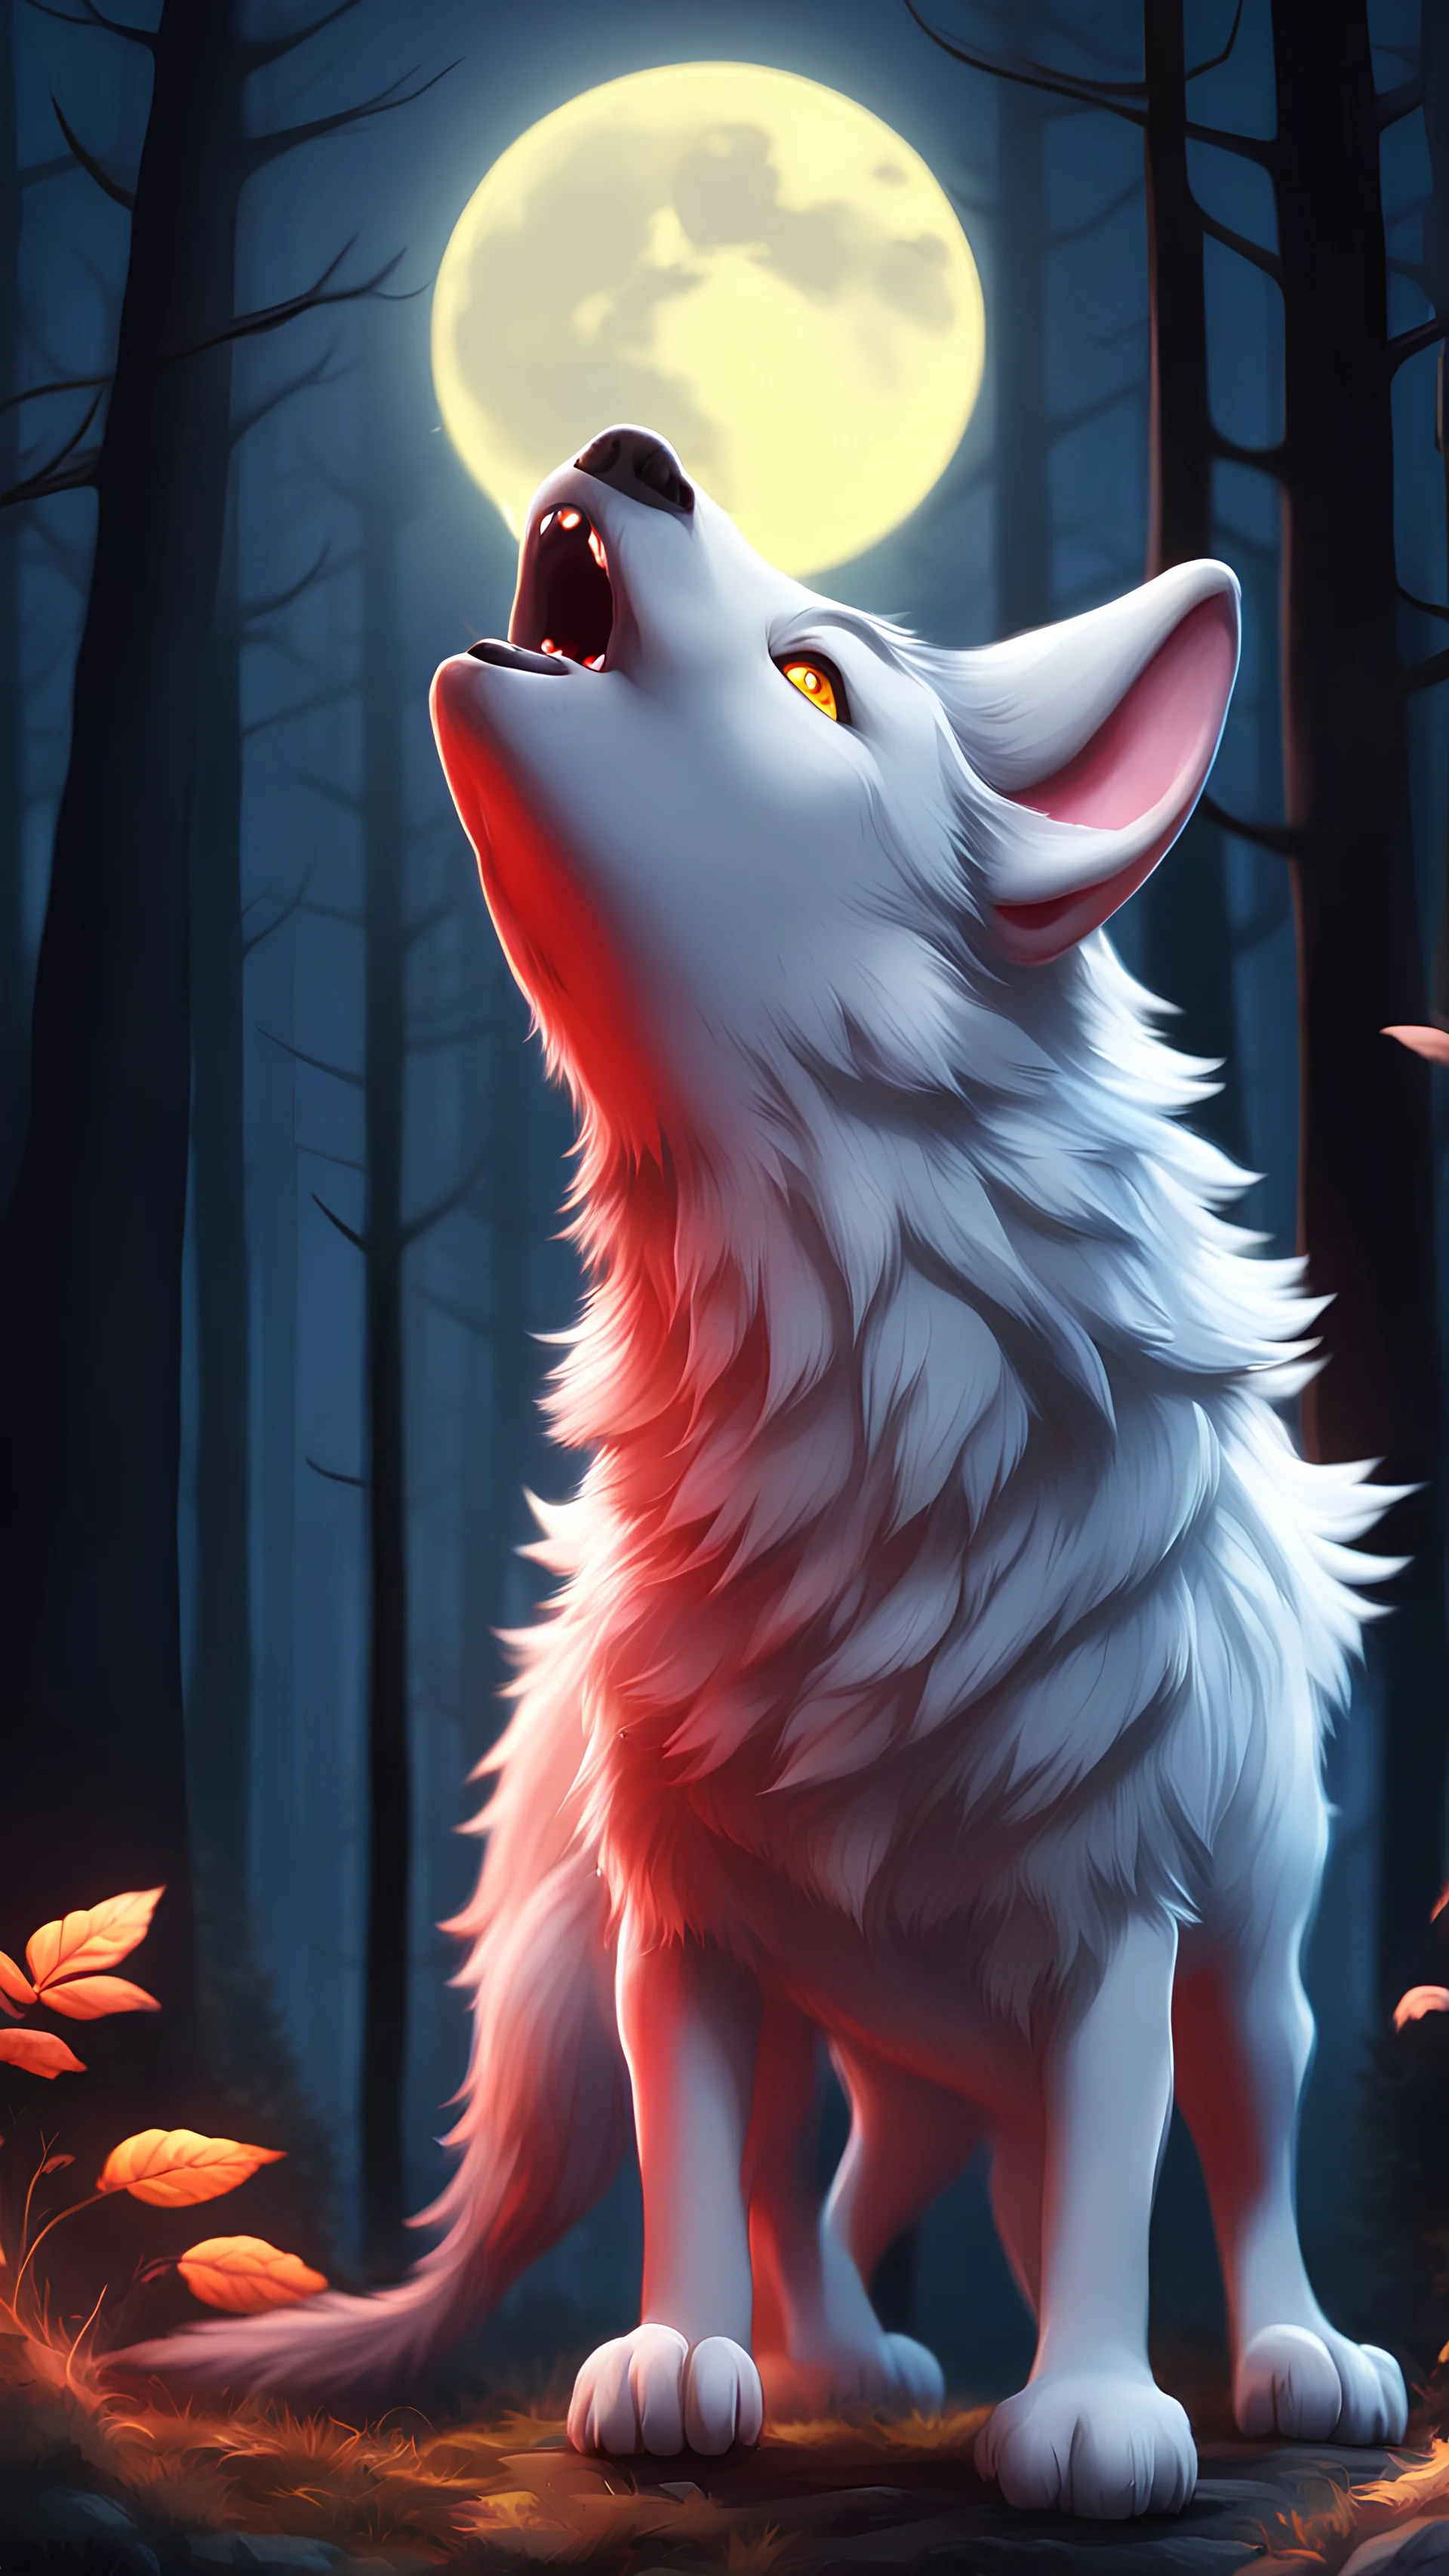 Kawaii, Cartoon, puppy Wolf, bully, All Body howling at the Moon, Horror lighting with red, yellow pink and blue colors, in the night forest, Caricature, Realism, Beautiful, Delicate Shades, Lights, Intricate, CGI, Botanical Art, Animal Art, Art Decoration, Realism, 4K , Detailed drawing, Depth of field, Digital painting, Computer graphics, Raw photo, HDR